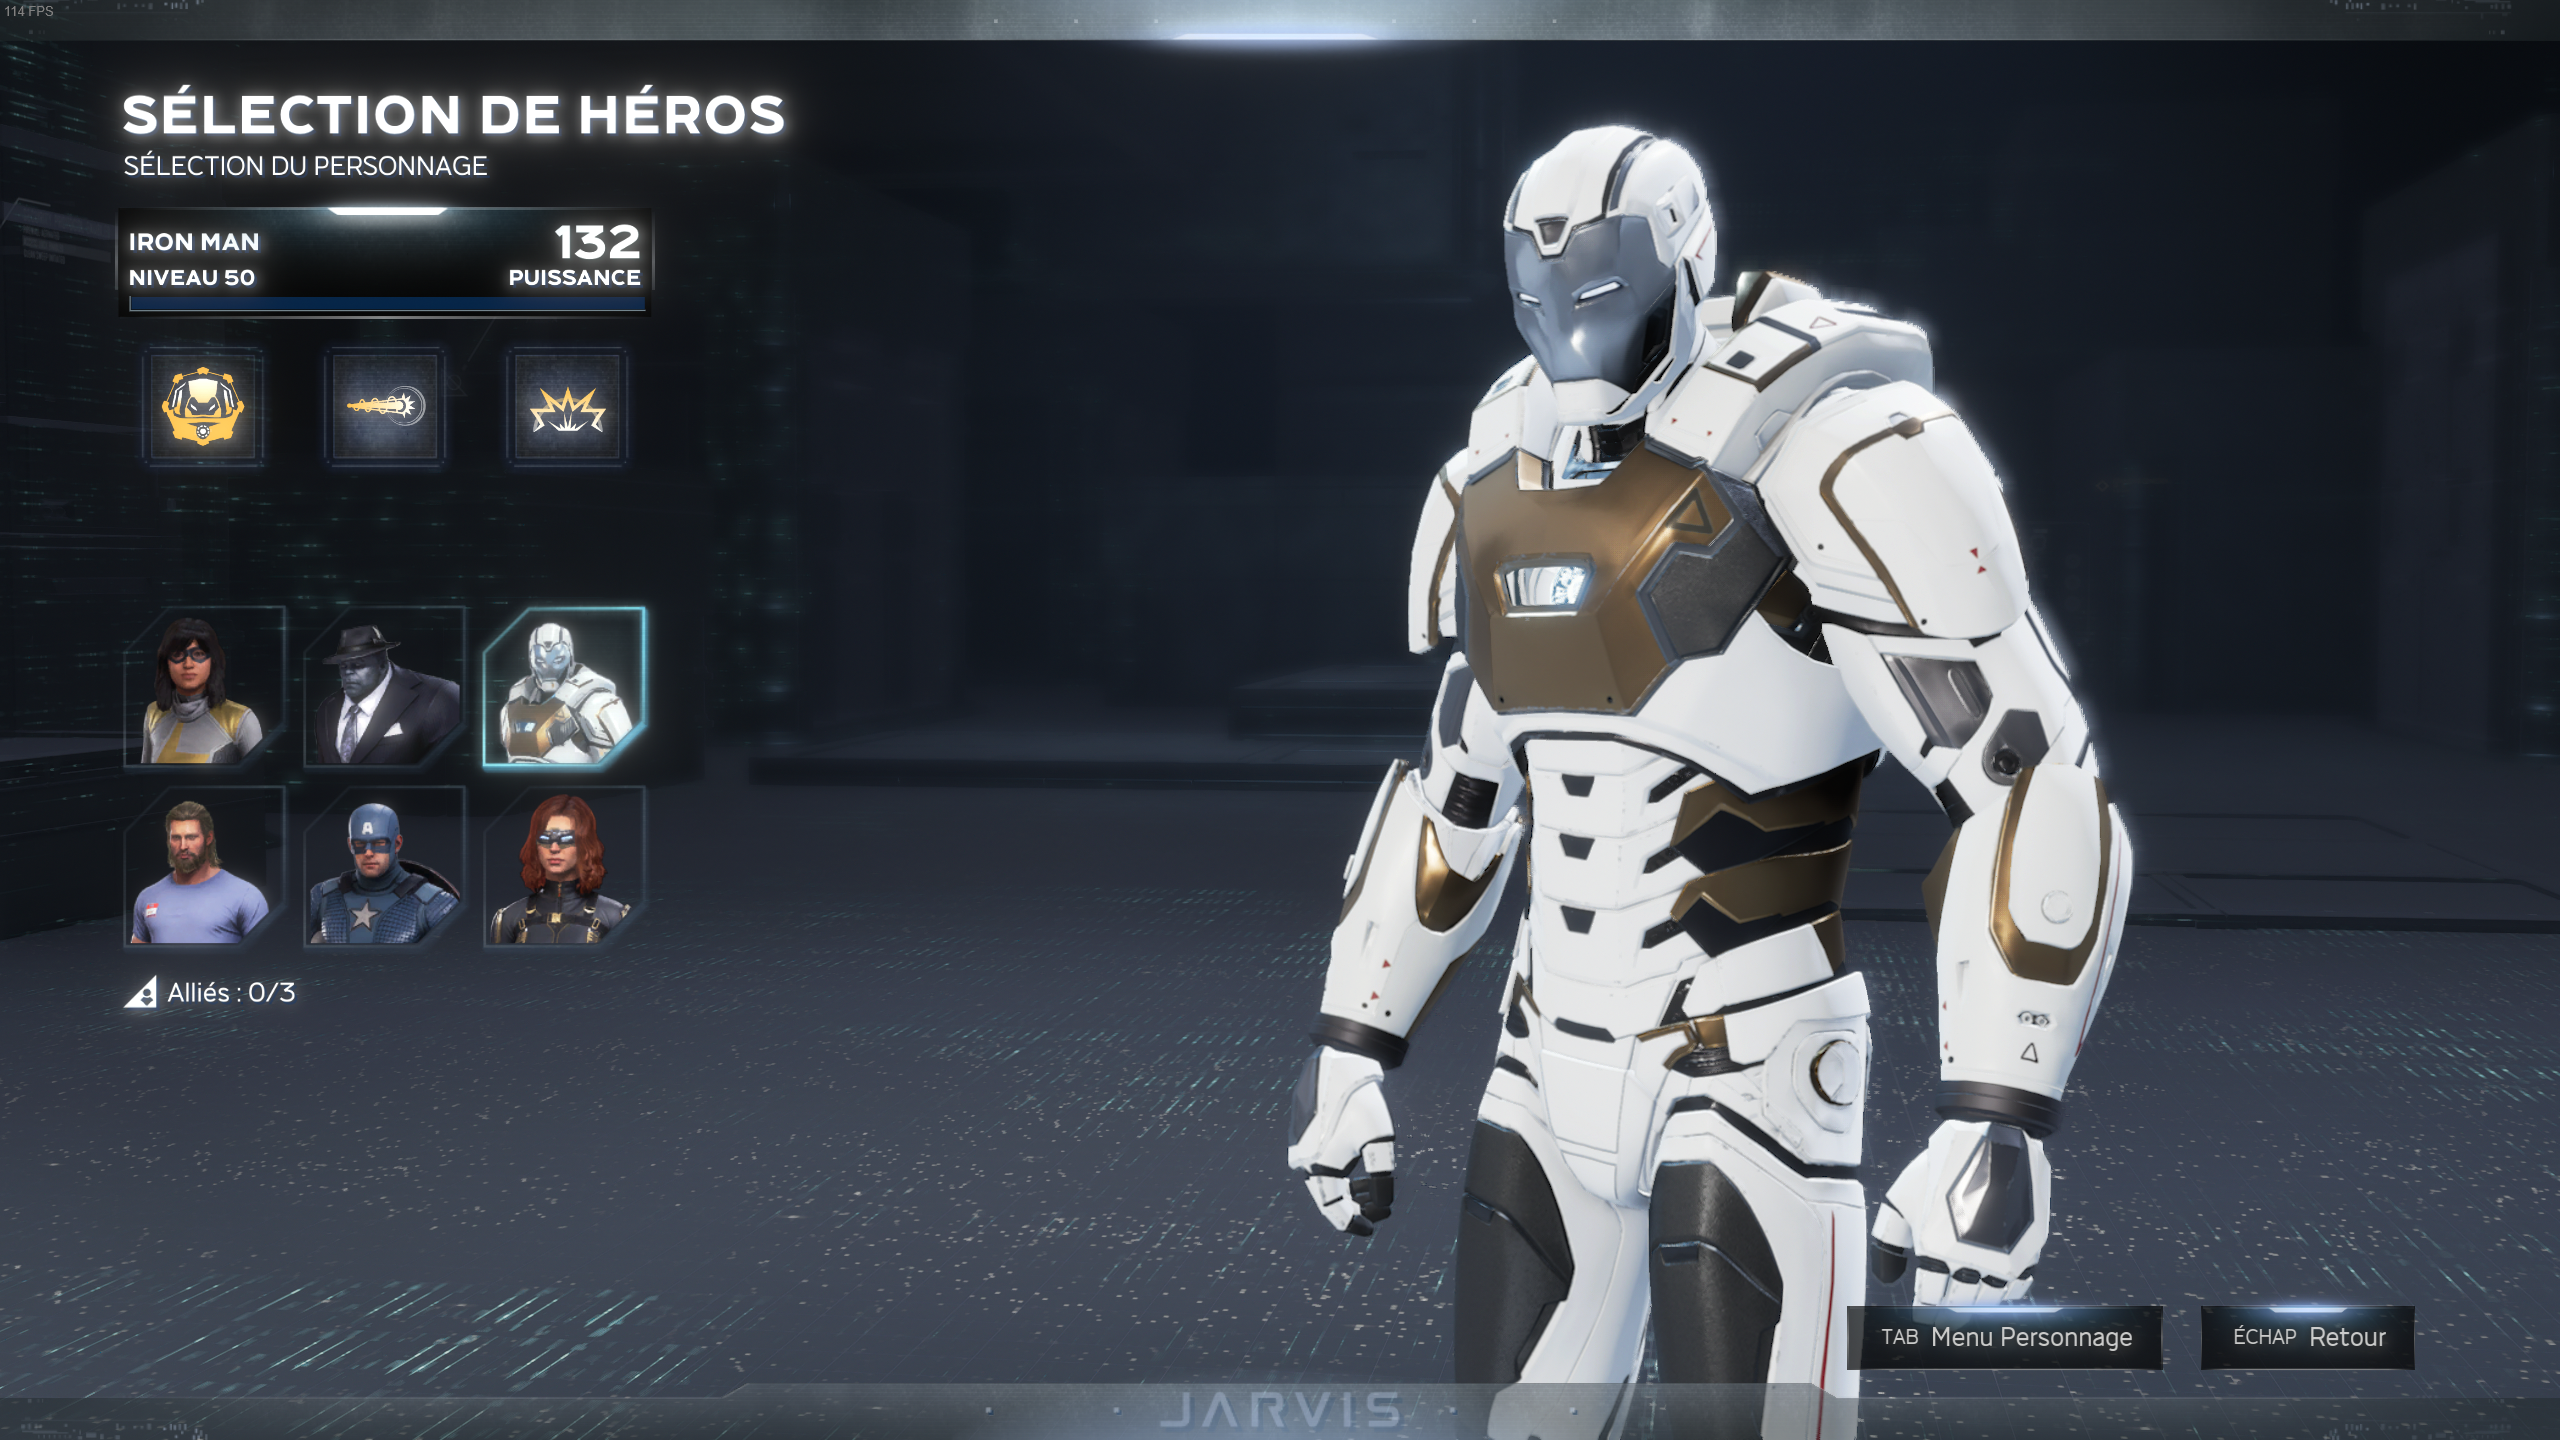 Iron Man Staboost skin comparaison Marvel Heroes and Marvel Avengers, it looks much better in Marvel Heroes